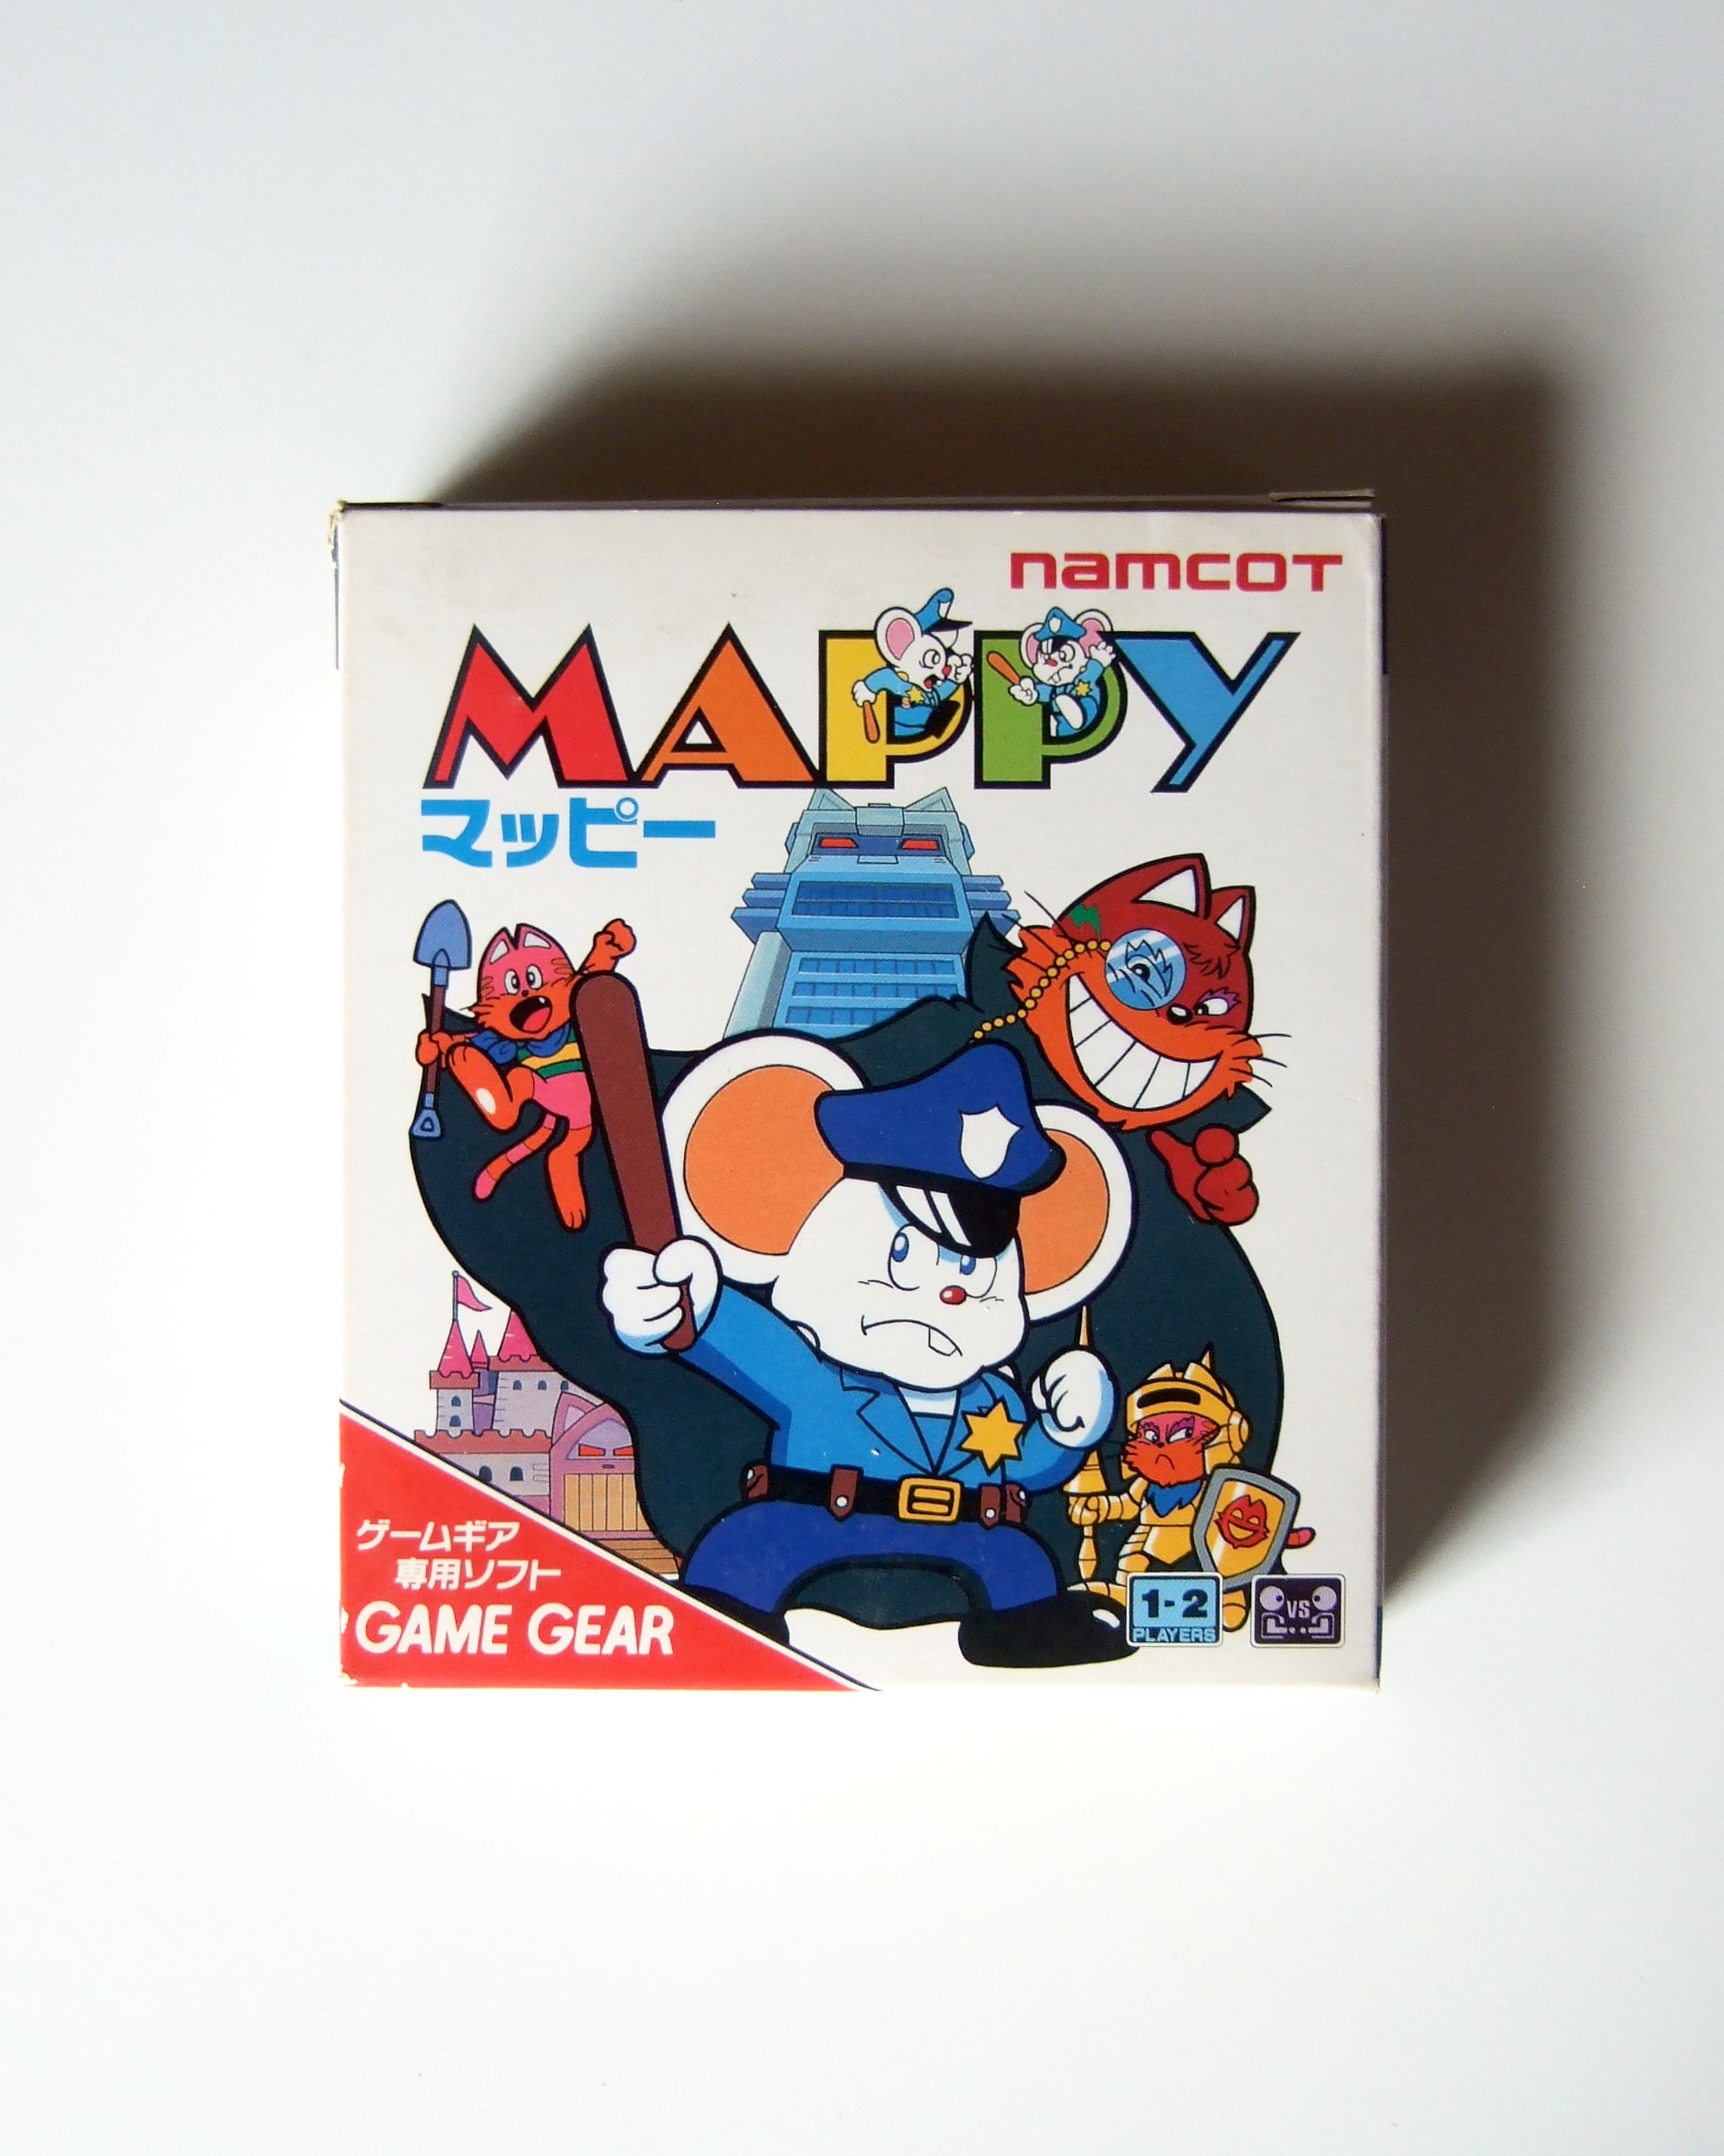 Mappy Arcade Game Logo Fonts In Use